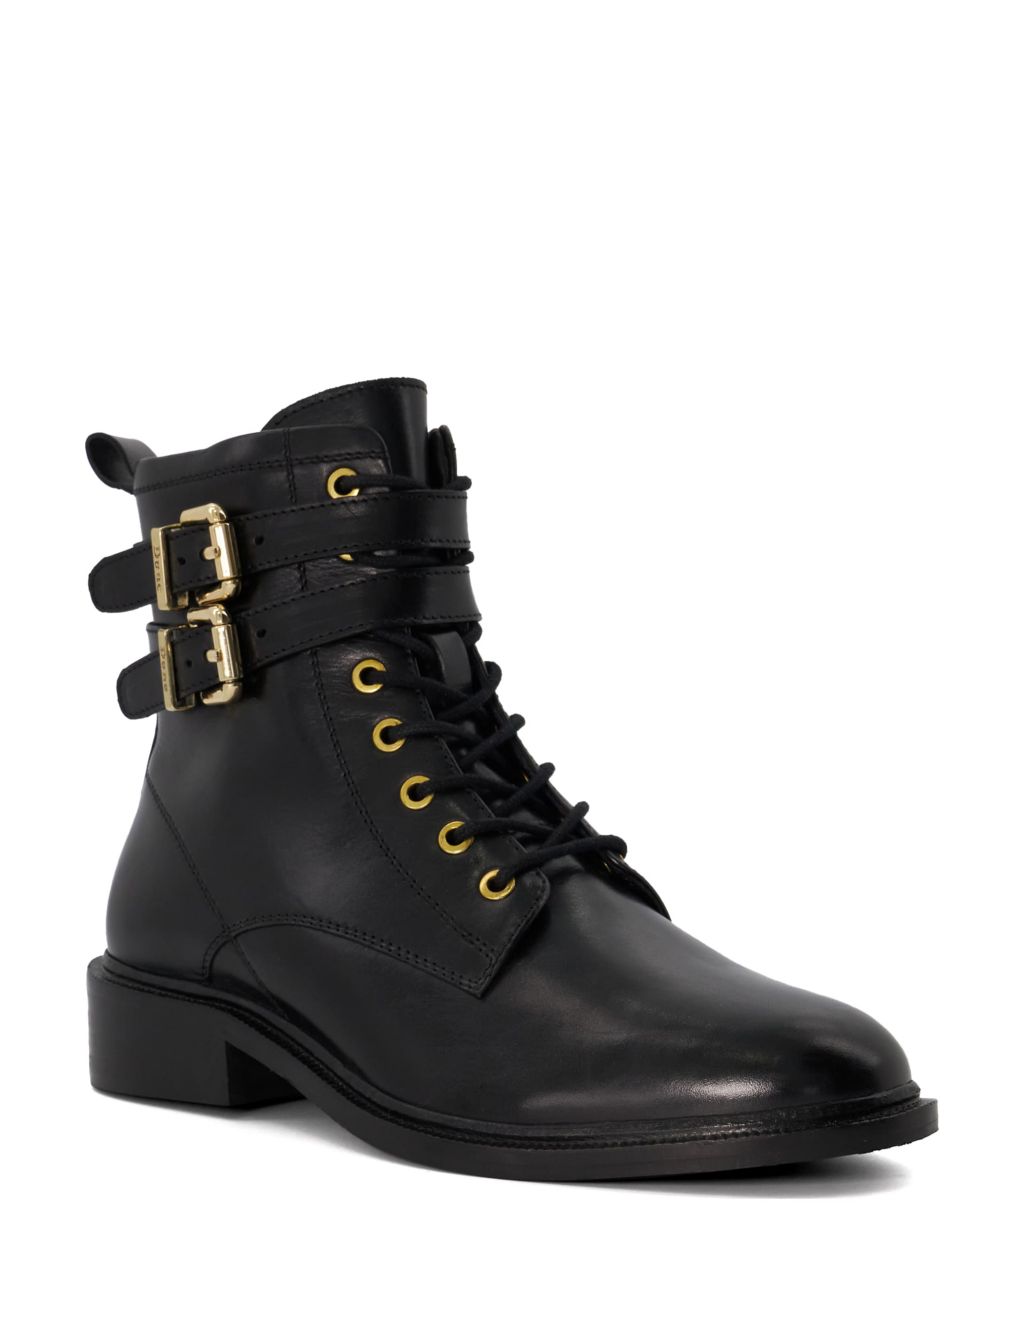 Leather Lace Up Buckle Flat Ankle Boots image 2